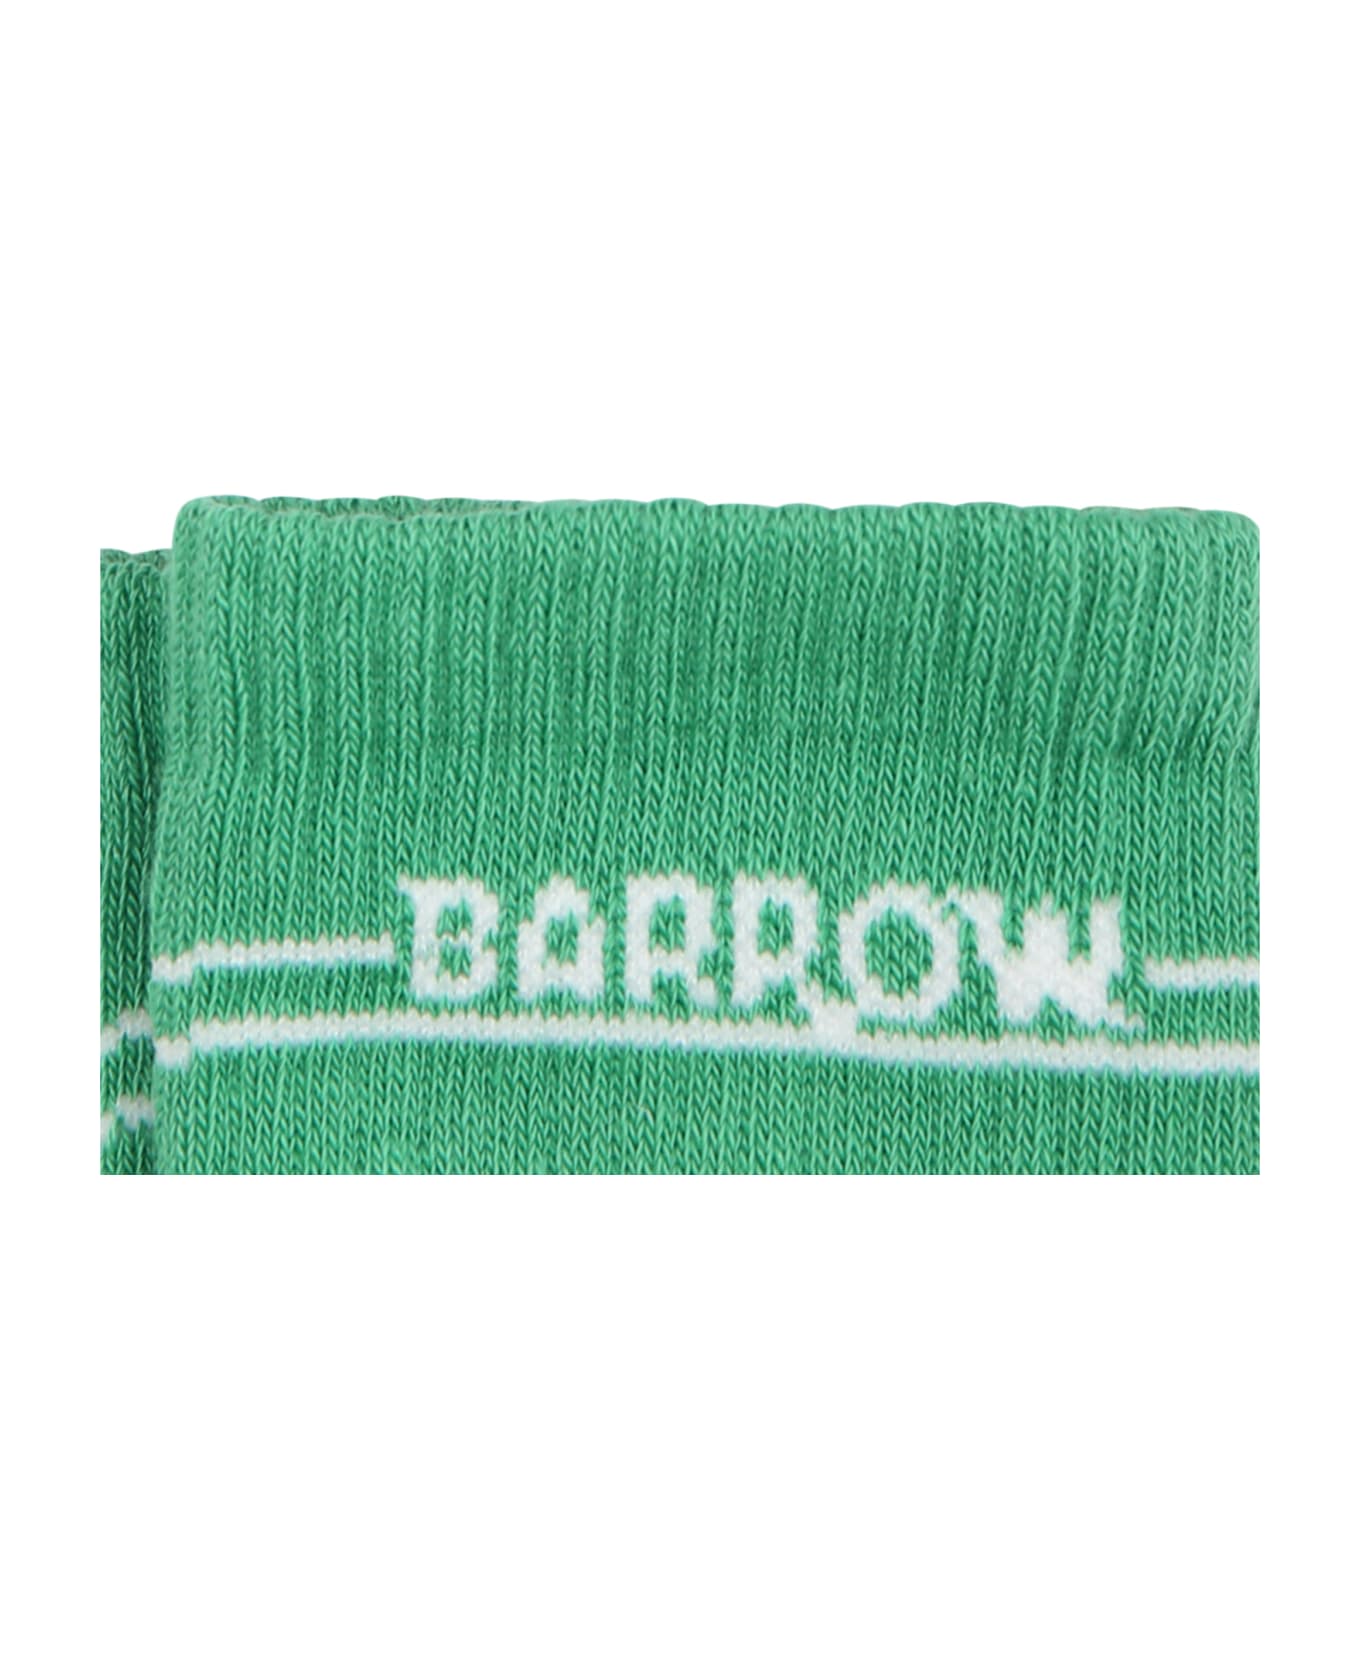 Barrow Green Socks For Kids With Smiley - Green